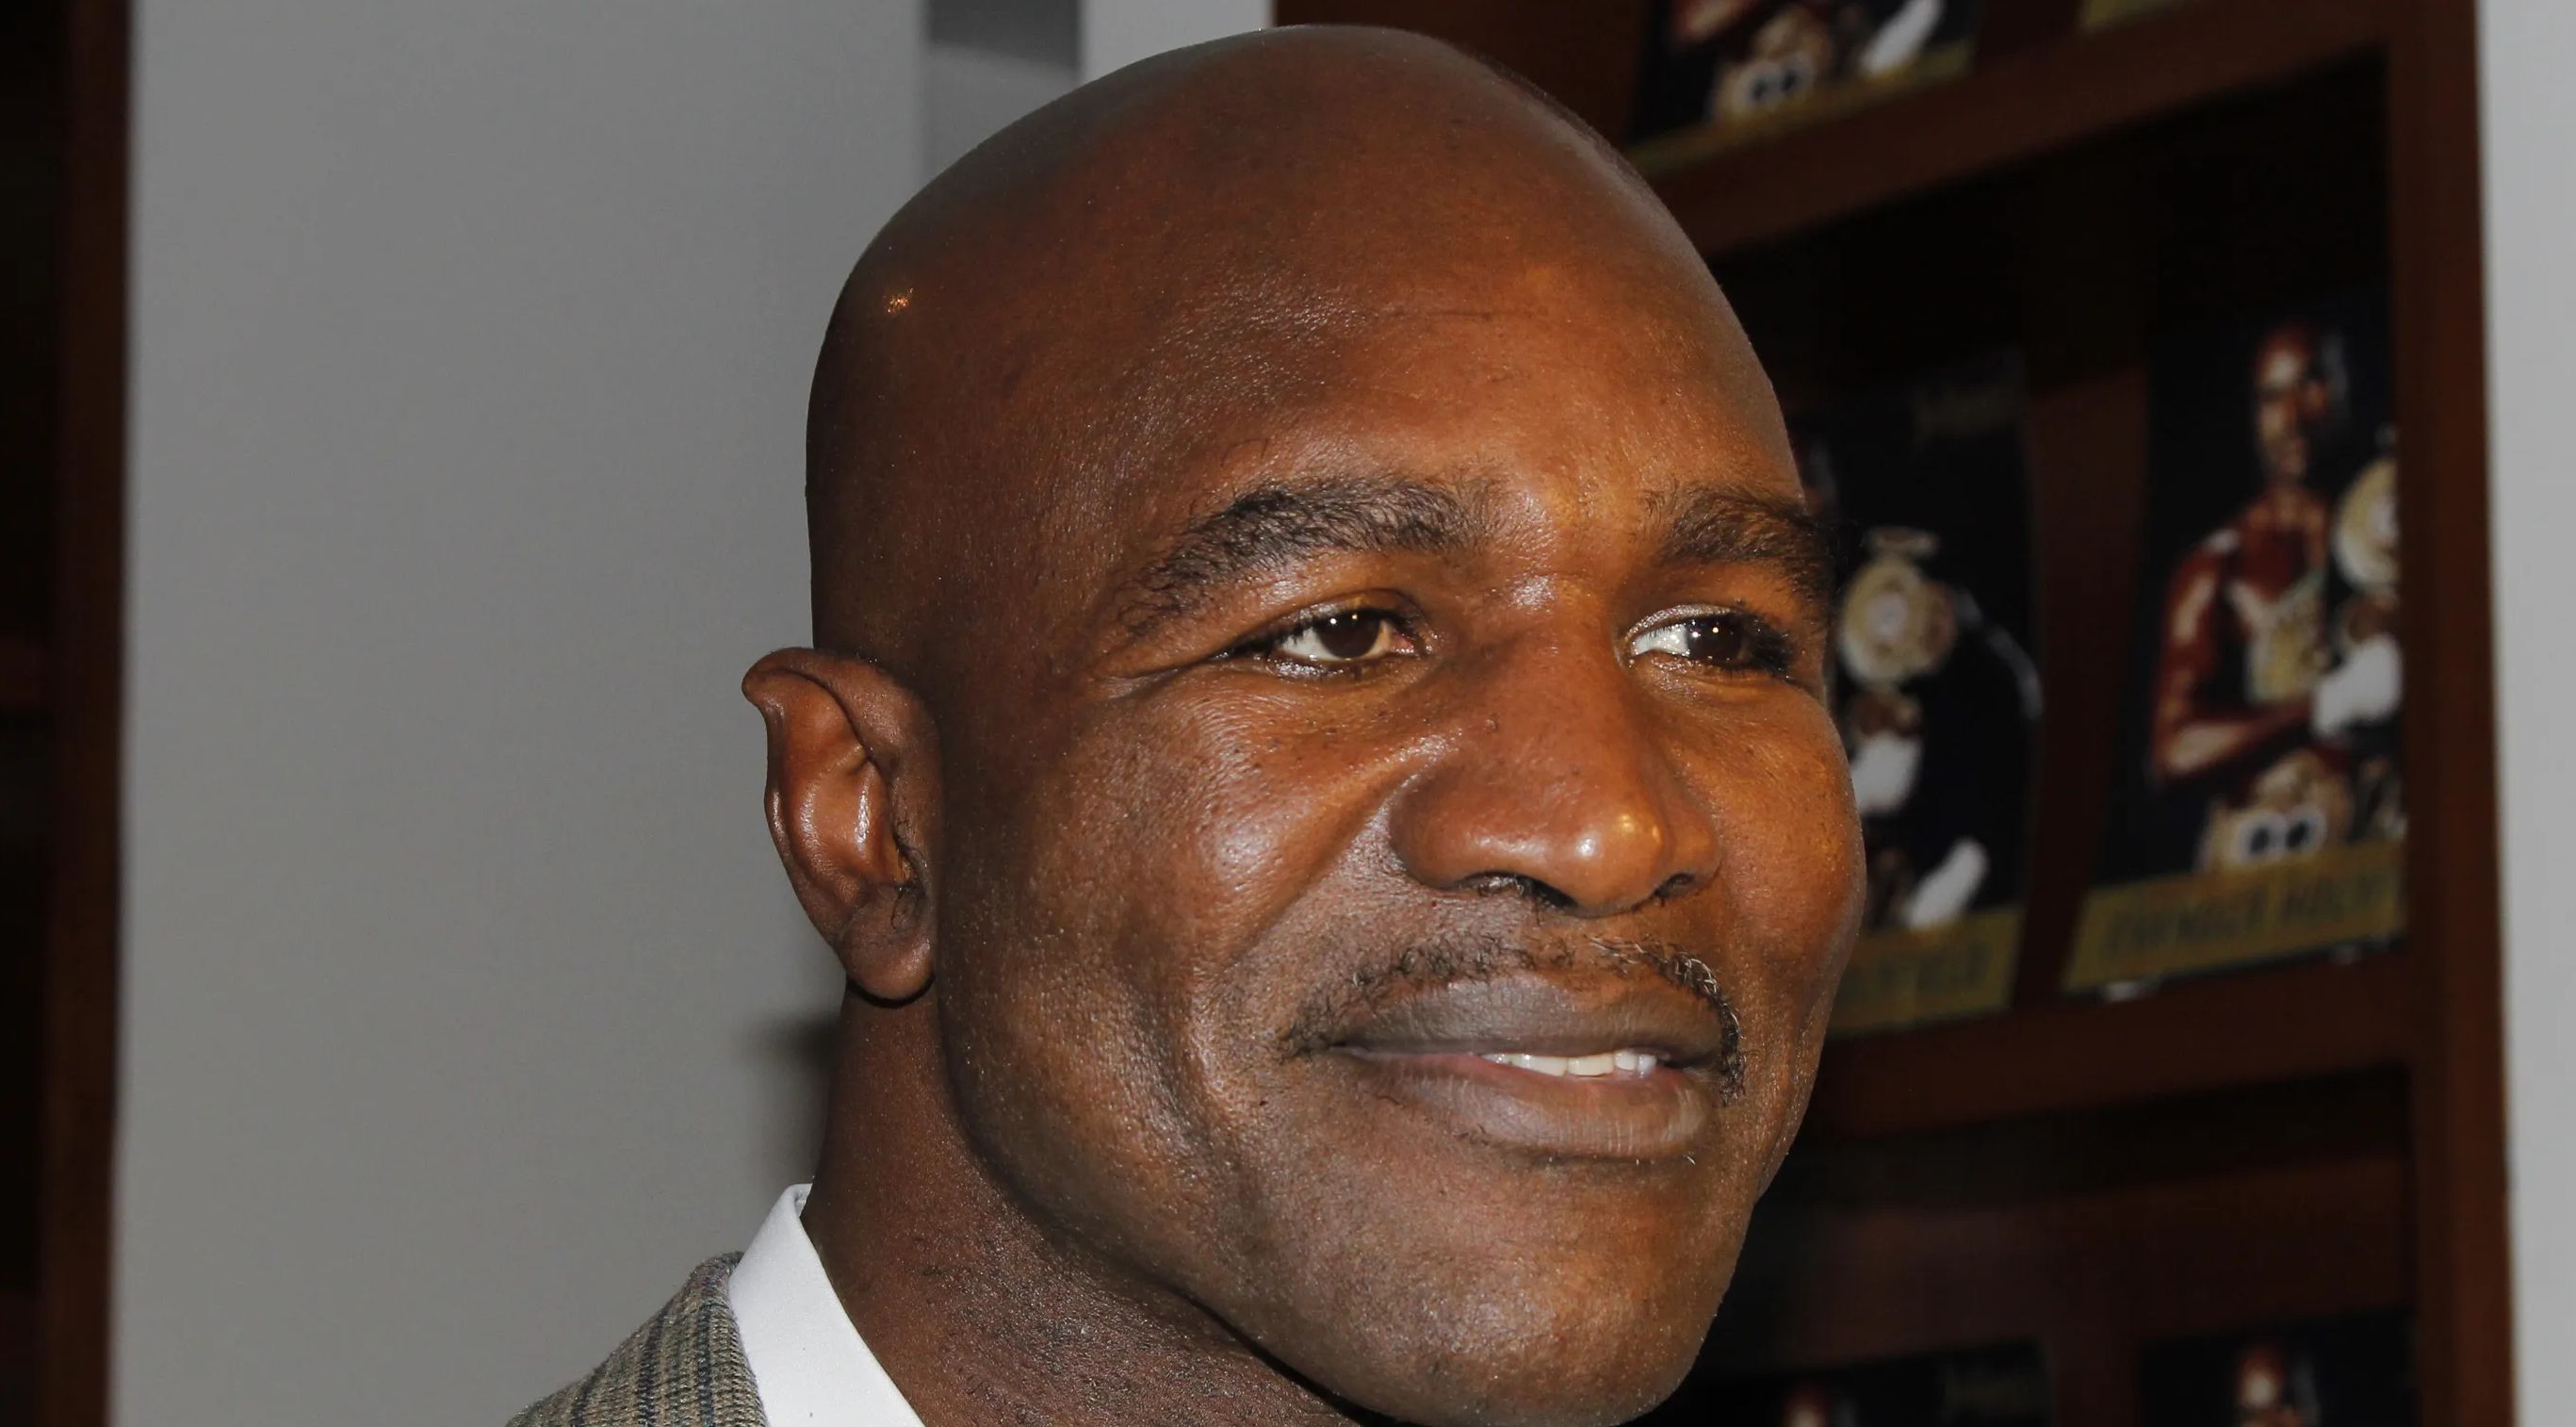 Former boxing champion Evander Holyfield looks on.